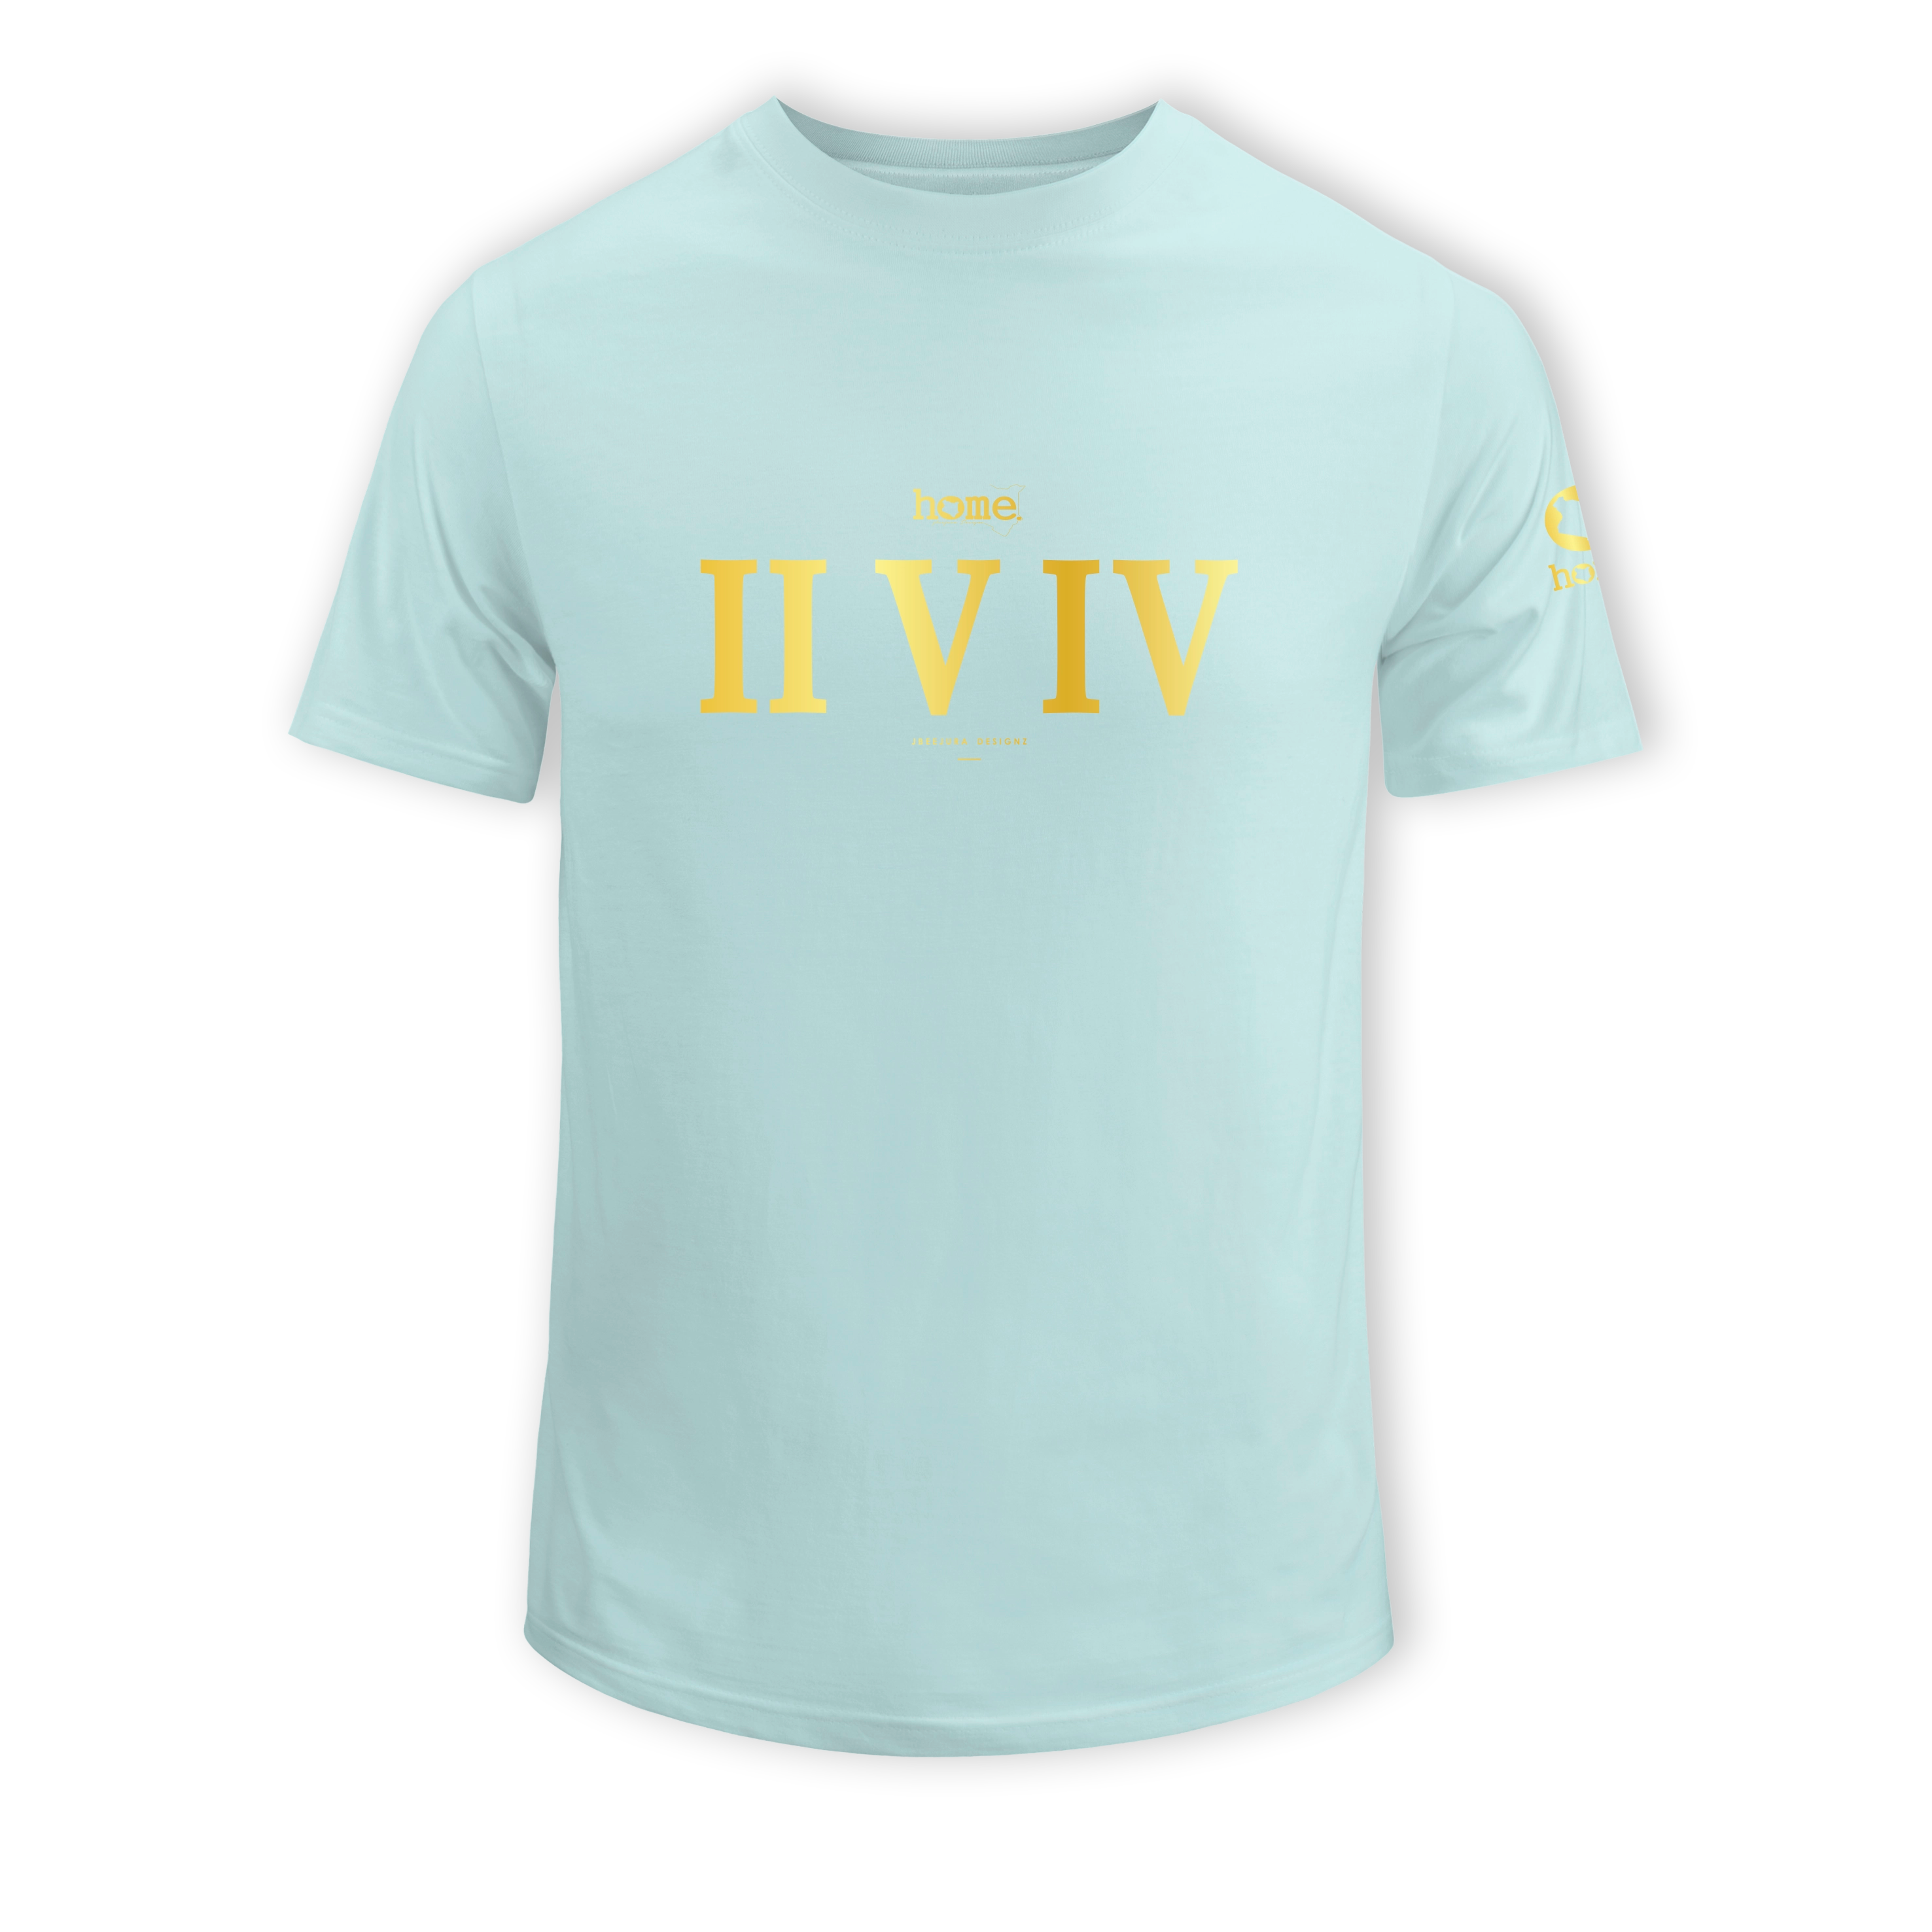 home_254 SHORT-SLEEVED MISTY BLUE T-SHIRT WITH A GOLD ROMAN NUMERALS PRINT – COTTON PLUS FABRIC